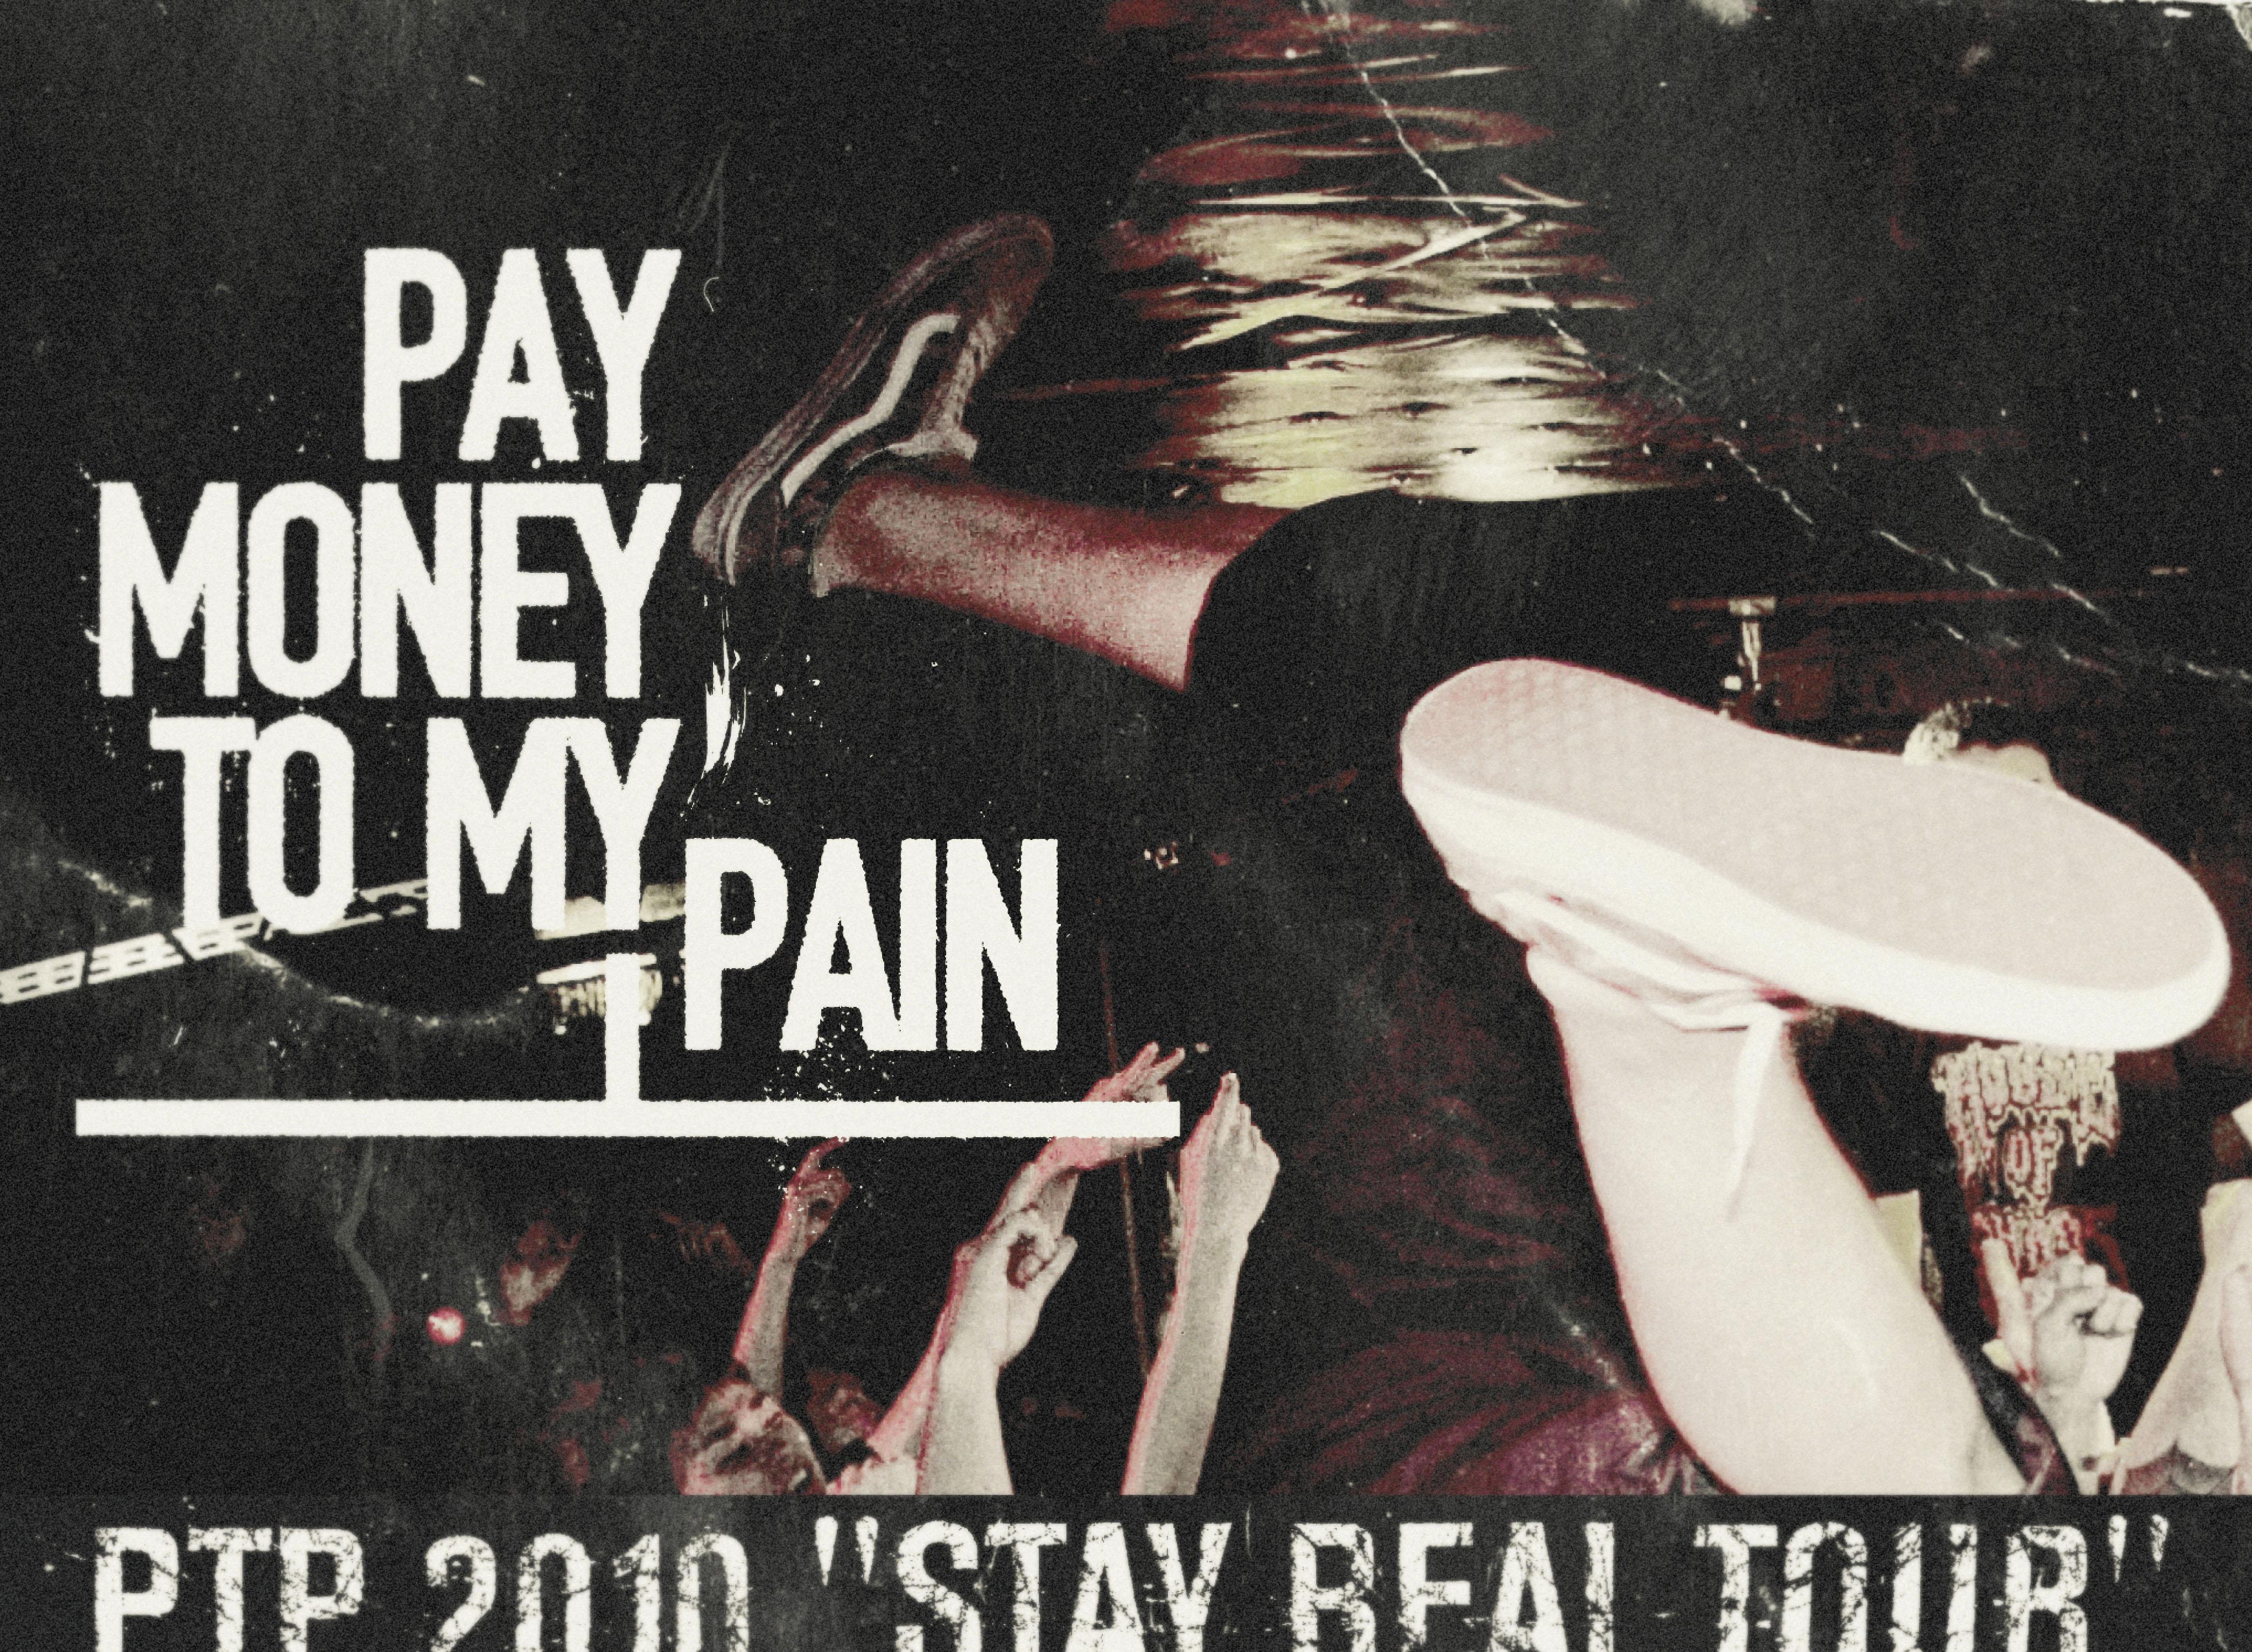 Pay money To my Pain: PTP 2010 Stay Real Tour (Flyer, 2010) - Kamikene